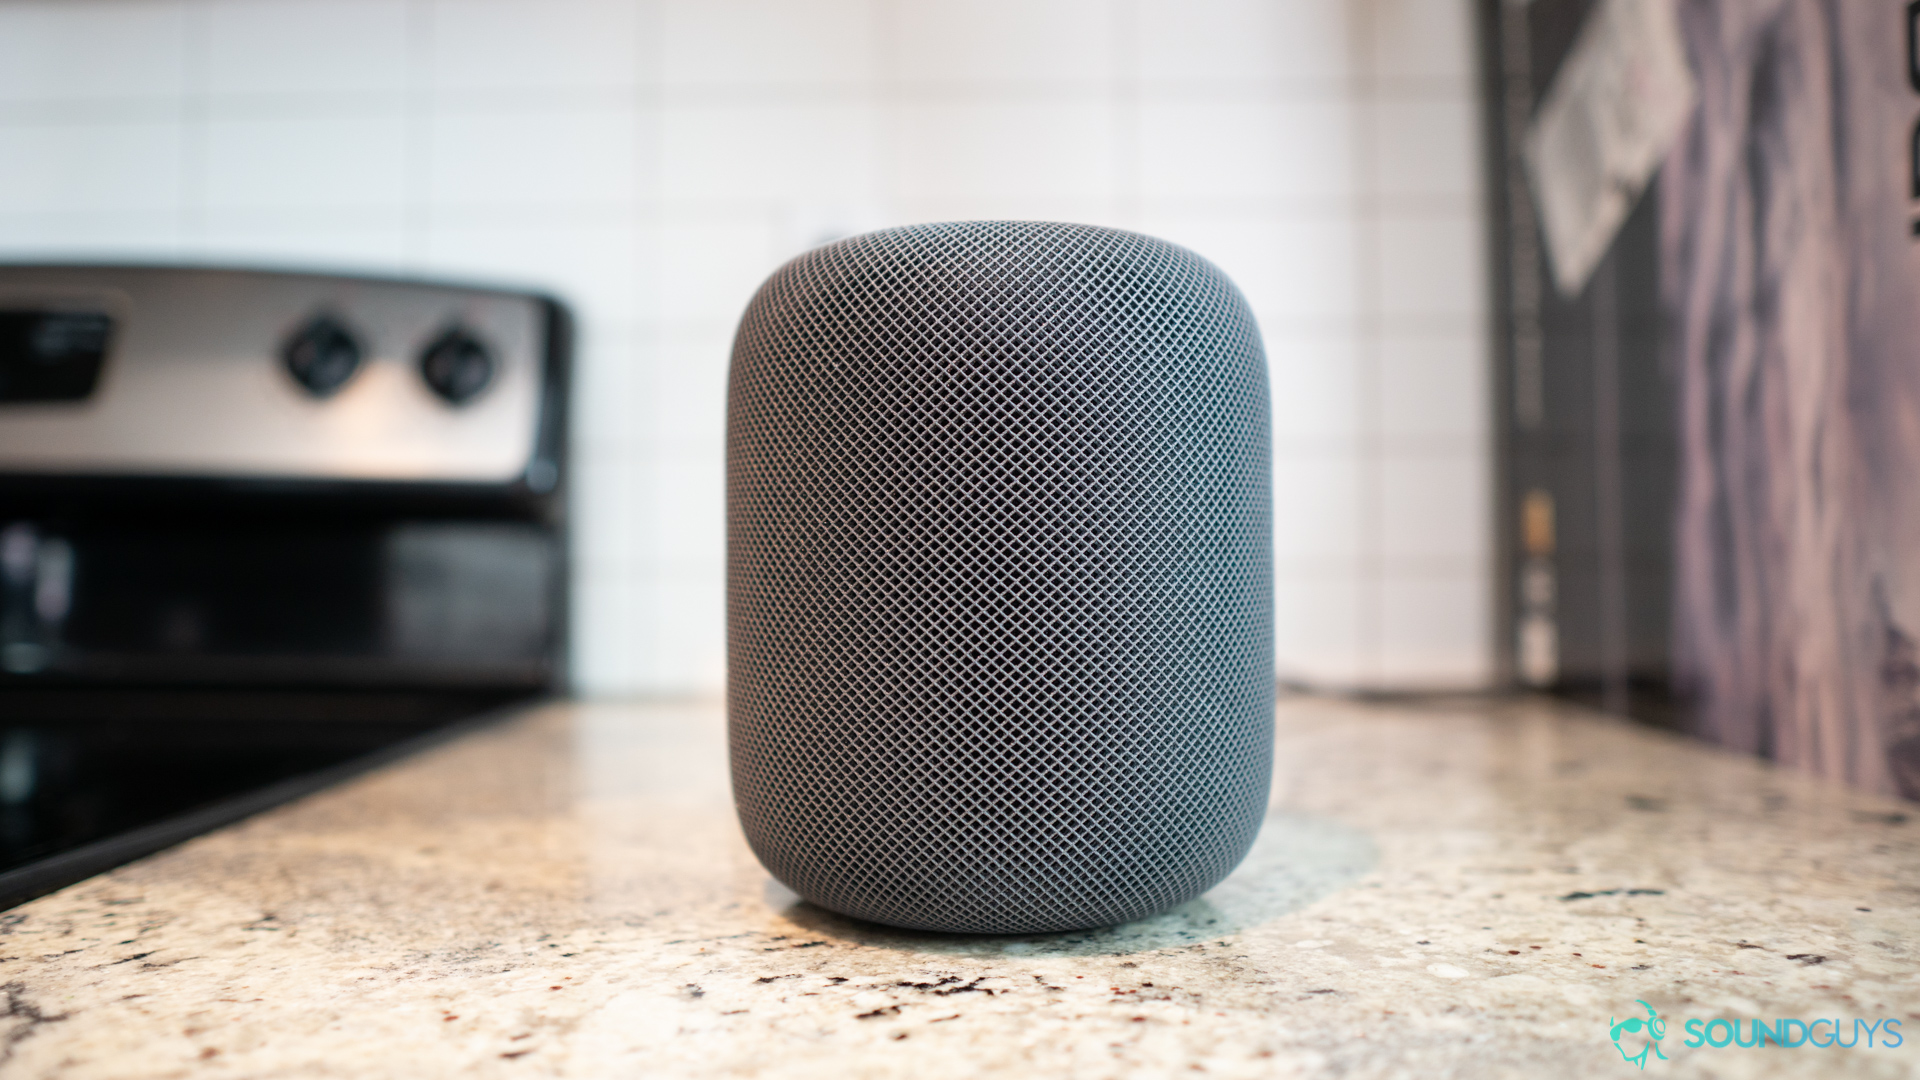 The Apple Homepod pictured on a marble kitchen countertop.